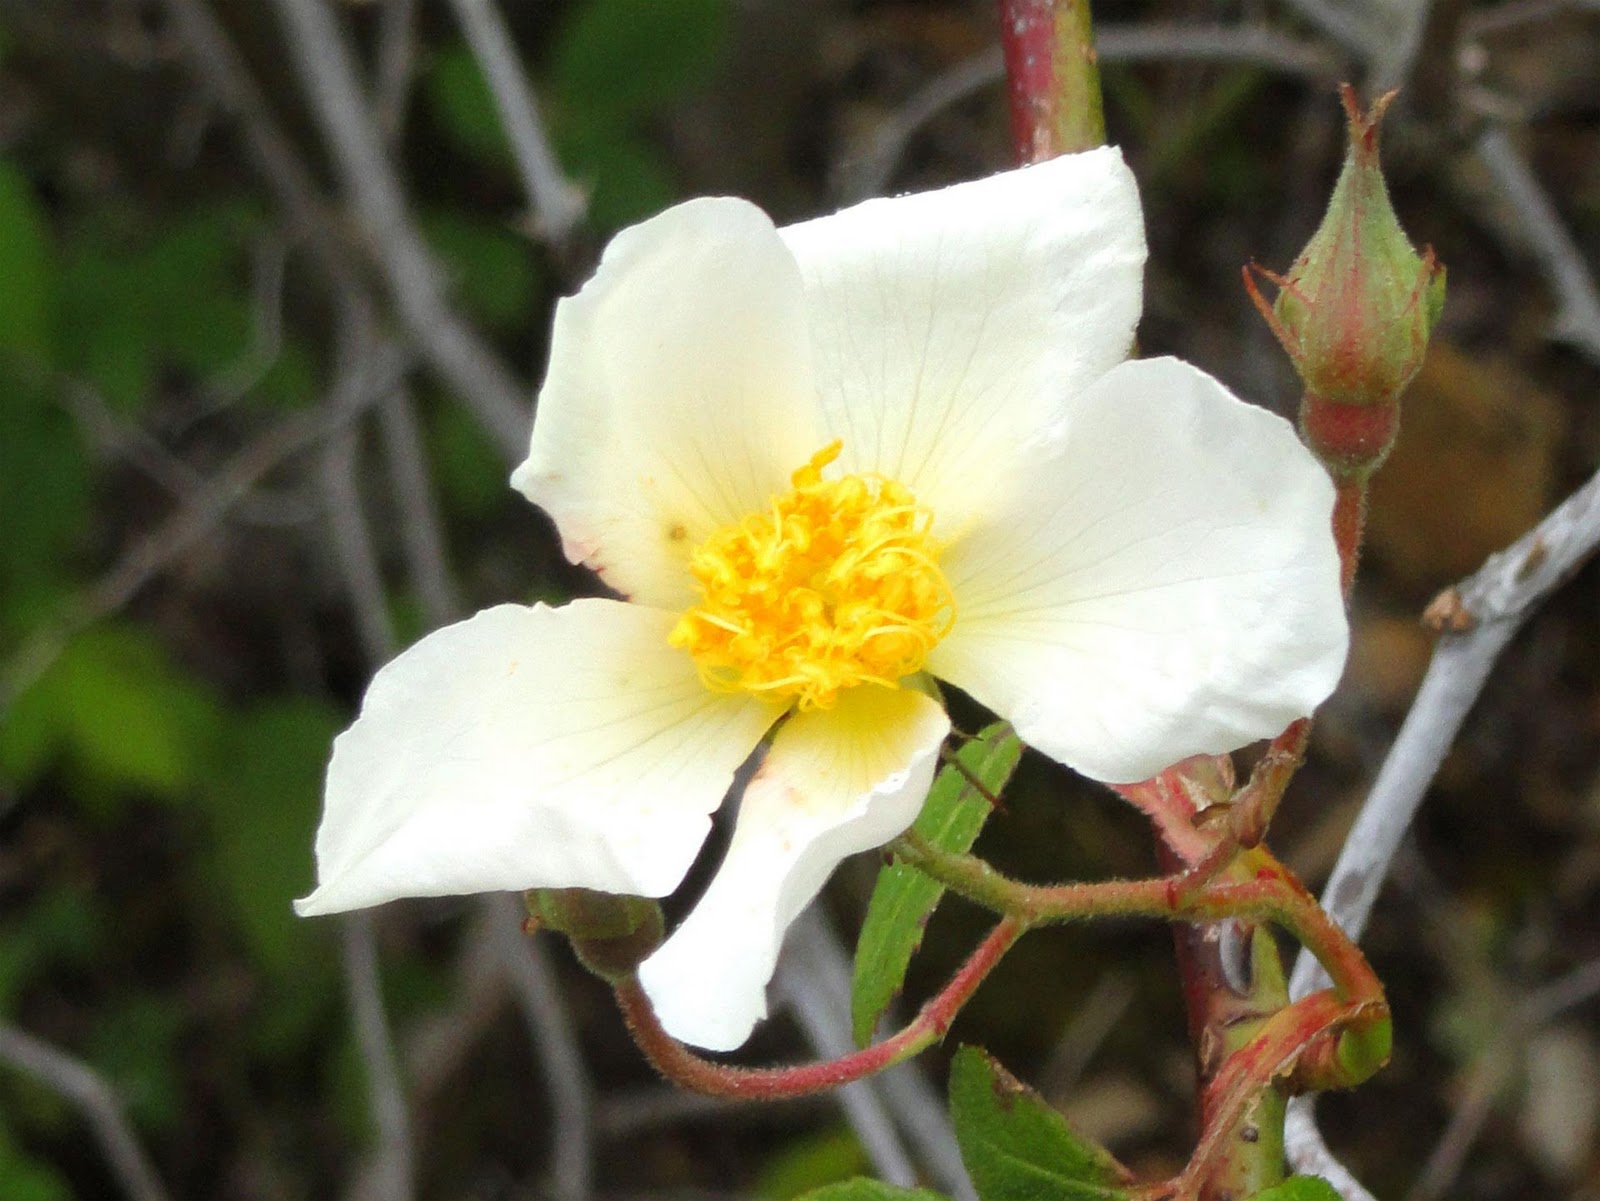 Creamy-white flower of a Rosa